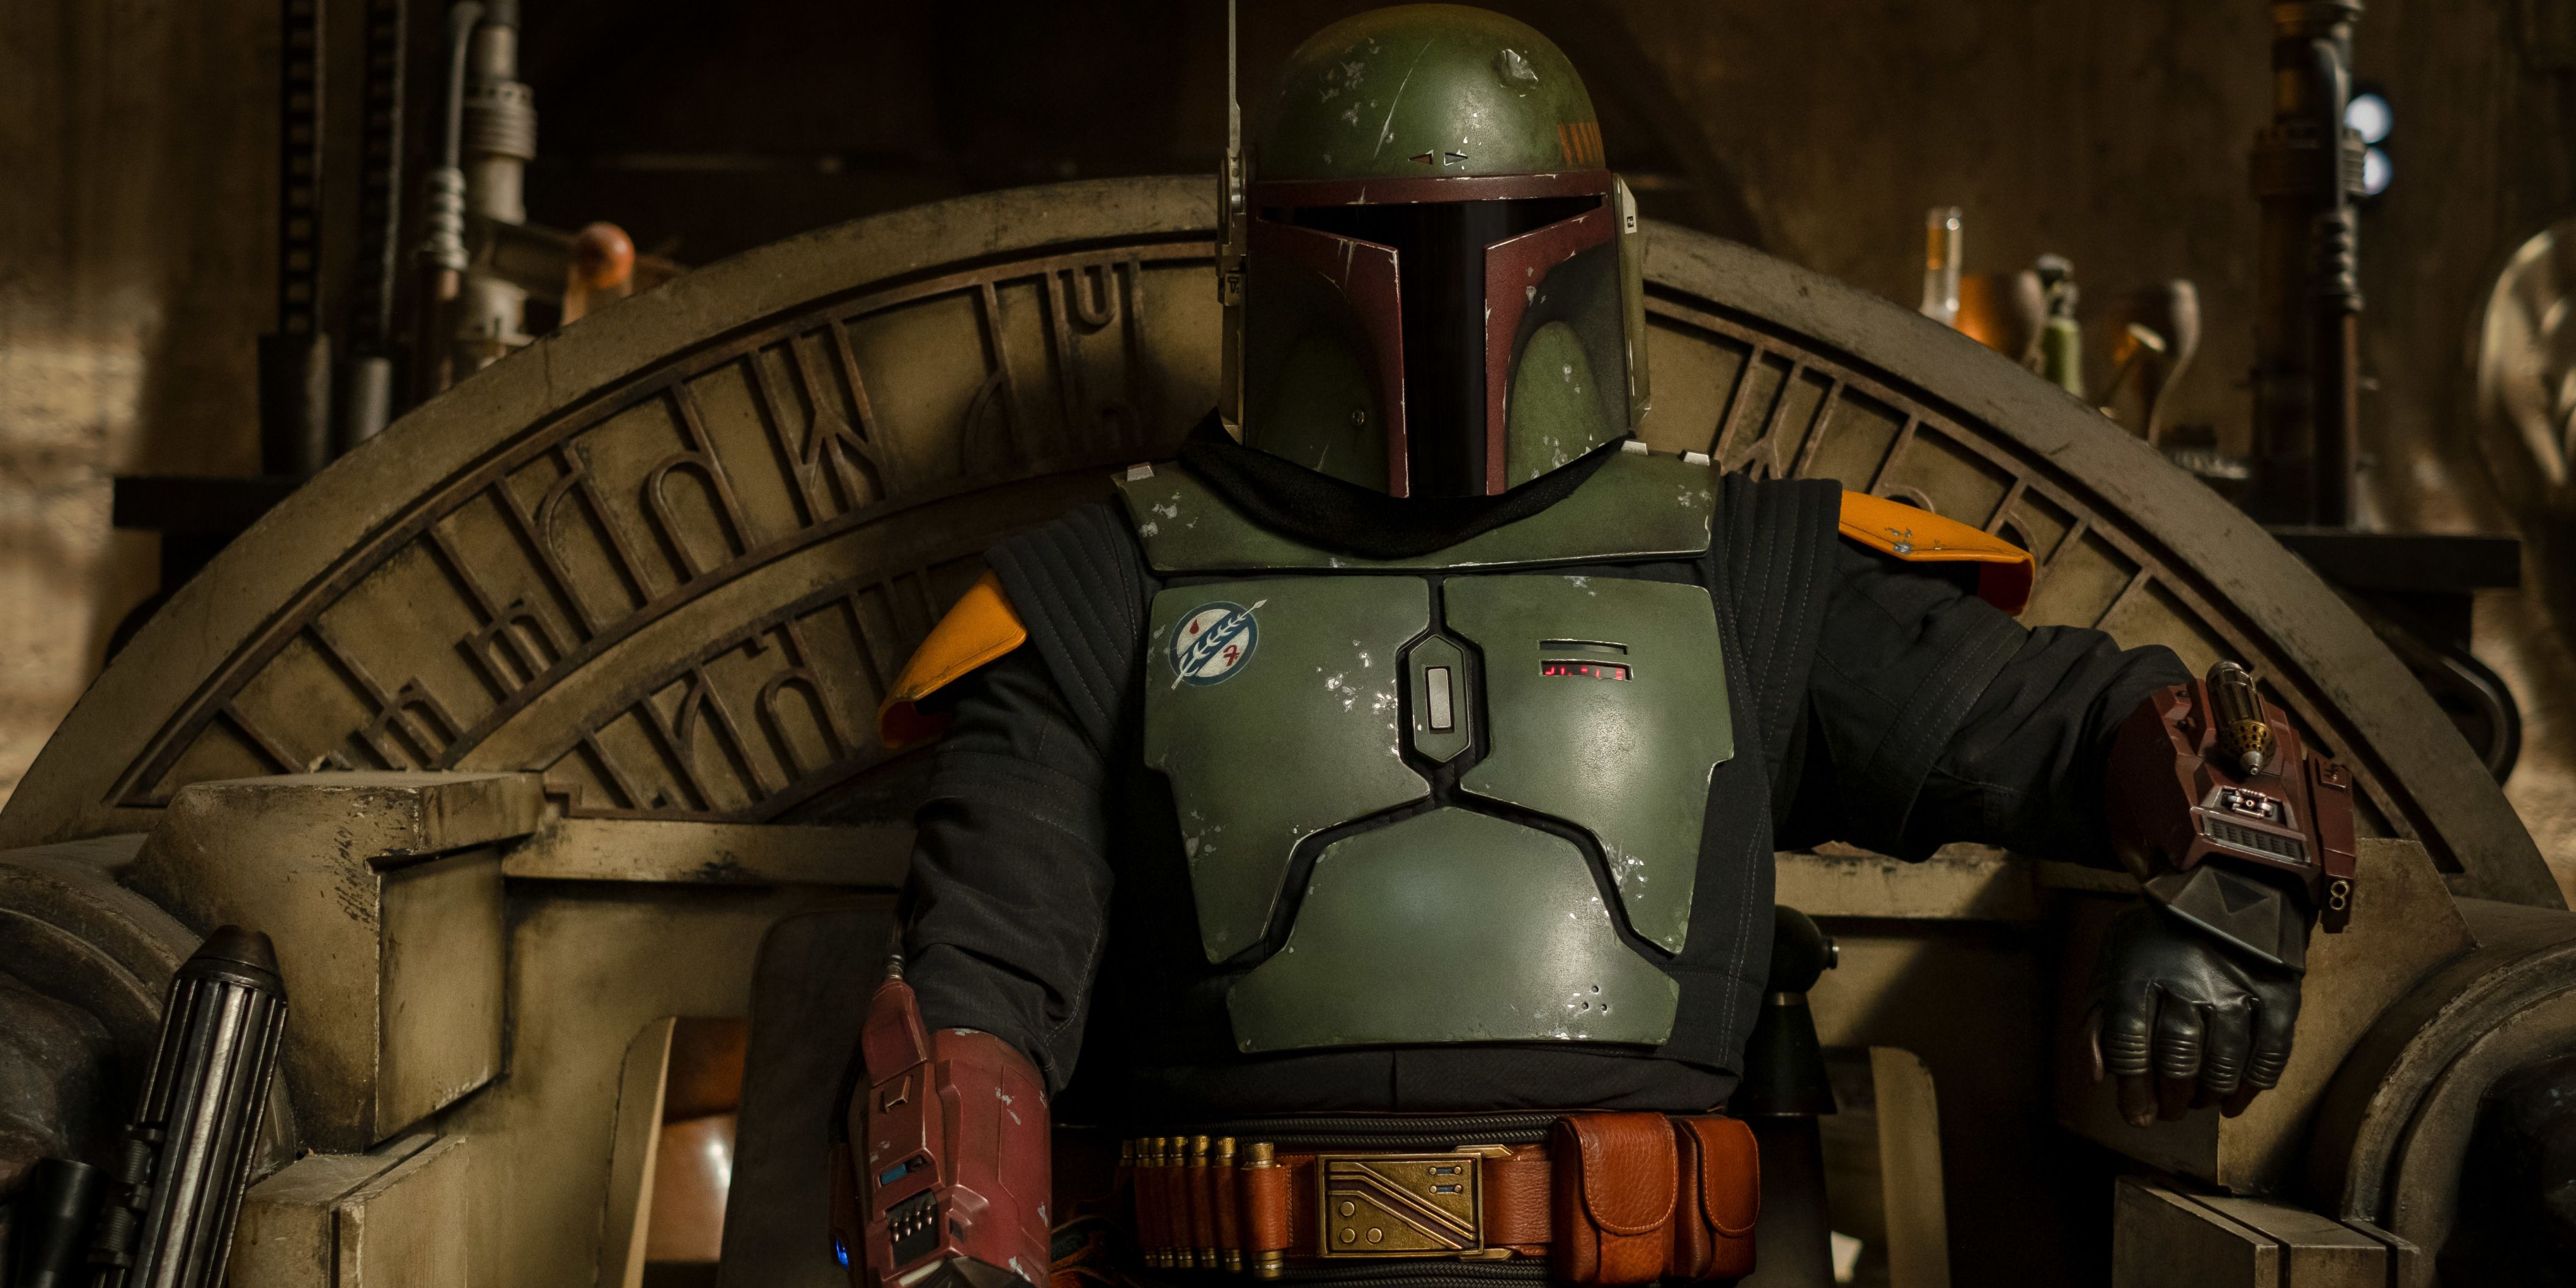 Close up of fully armored Boba Fett sitting on a throne with his arm propped up.